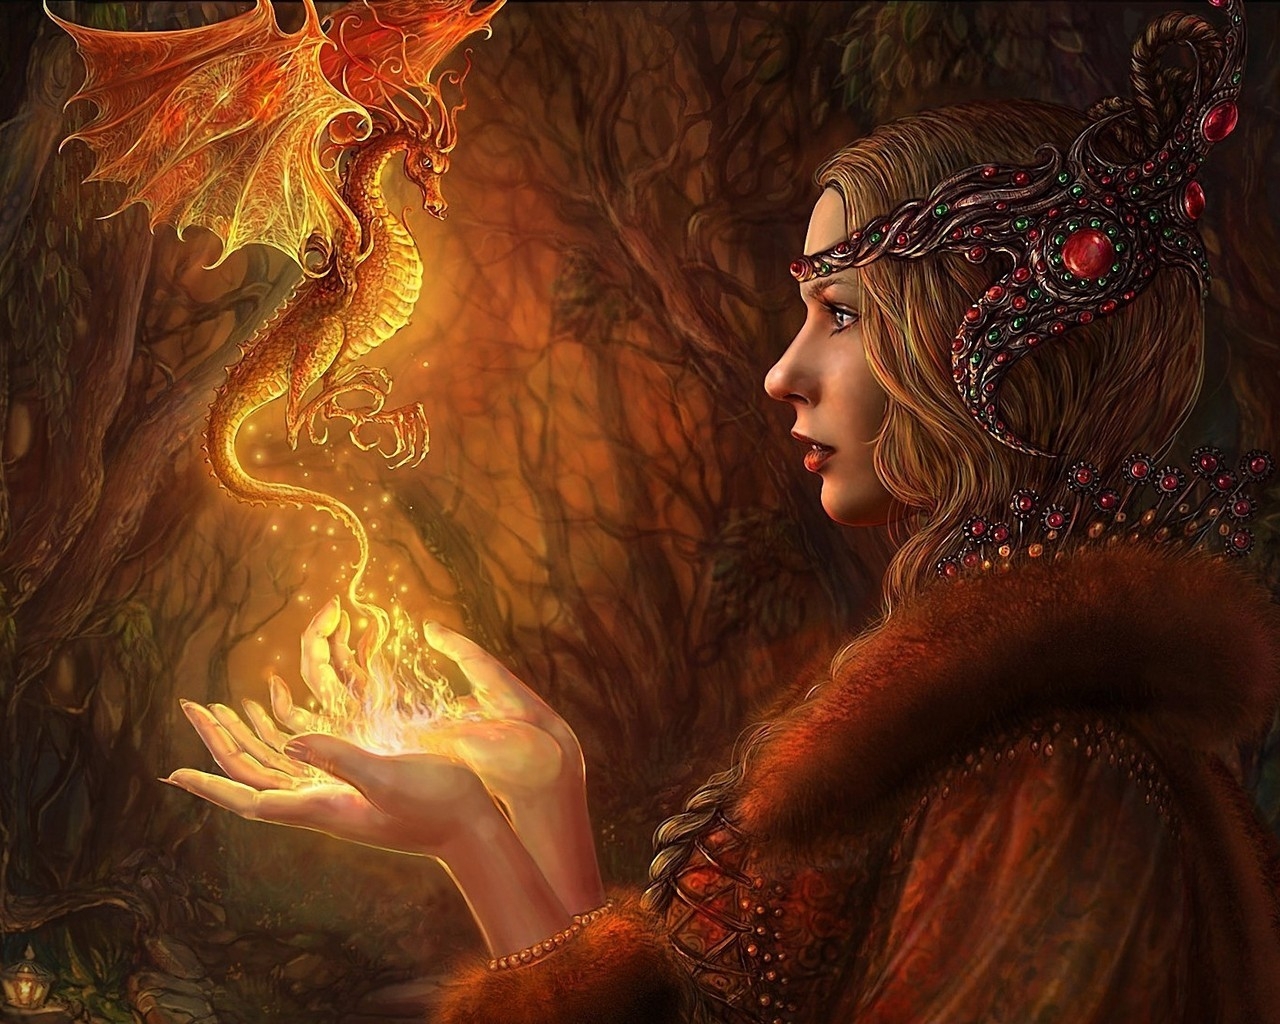 The Girl with Dragon for 1280 x 1024 resolution